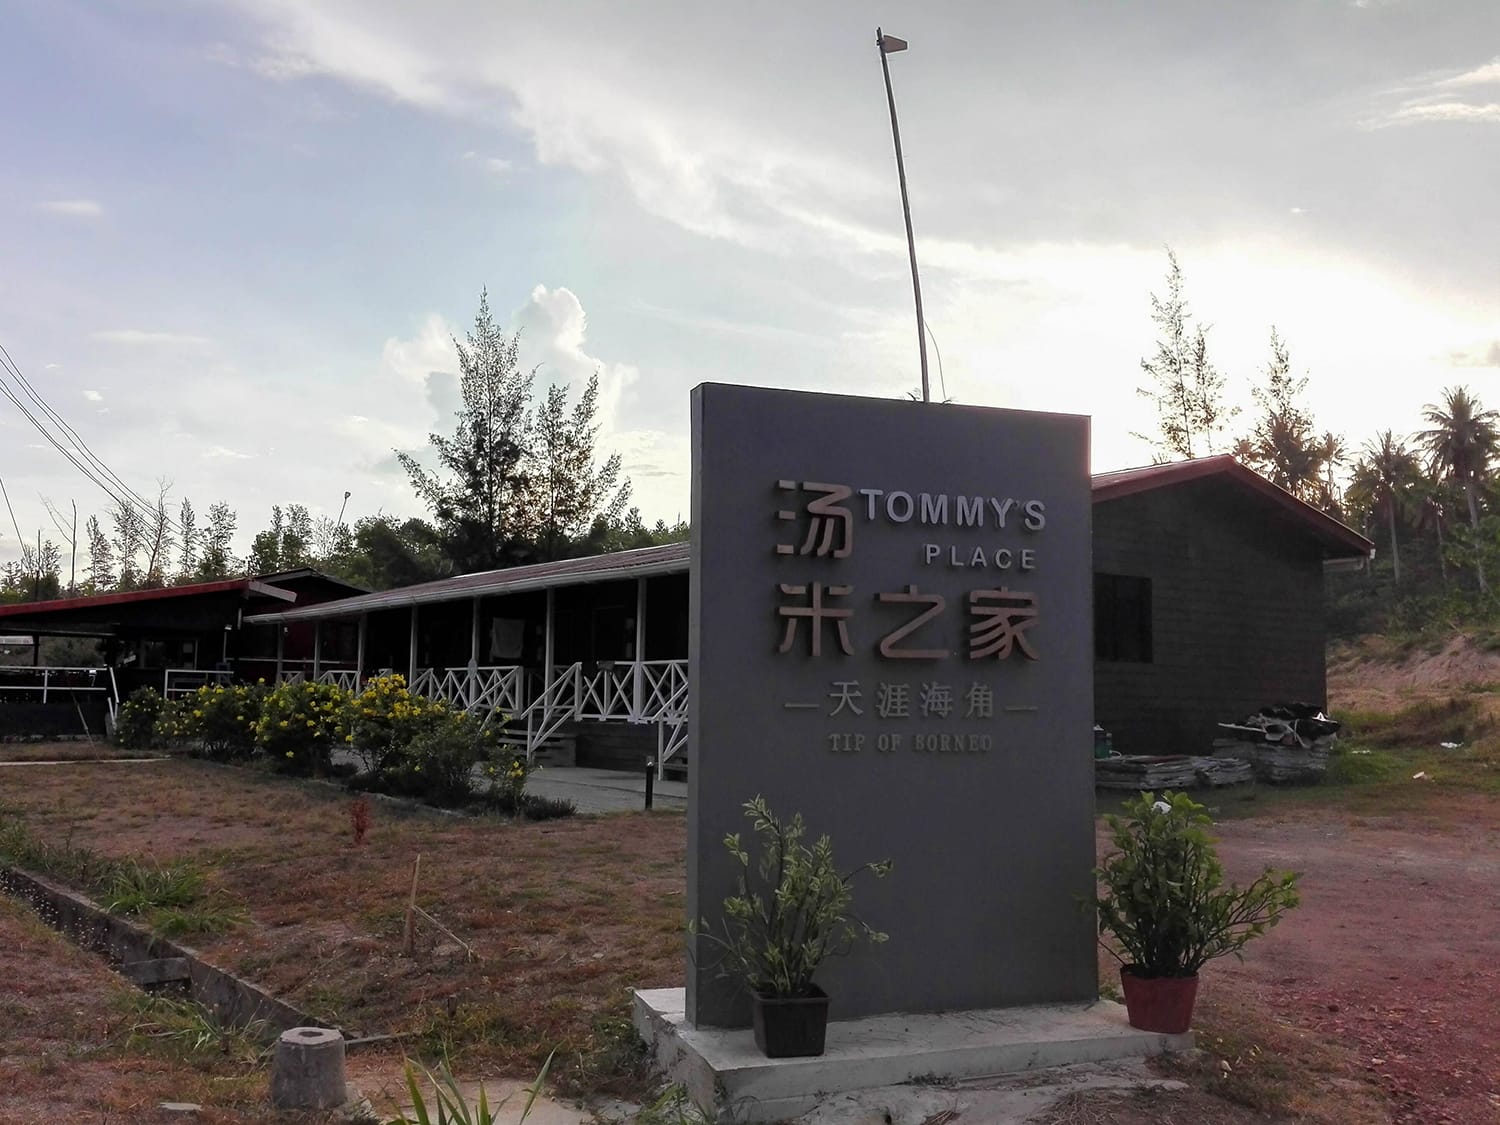 Stickies Weekend Escape to Kudat